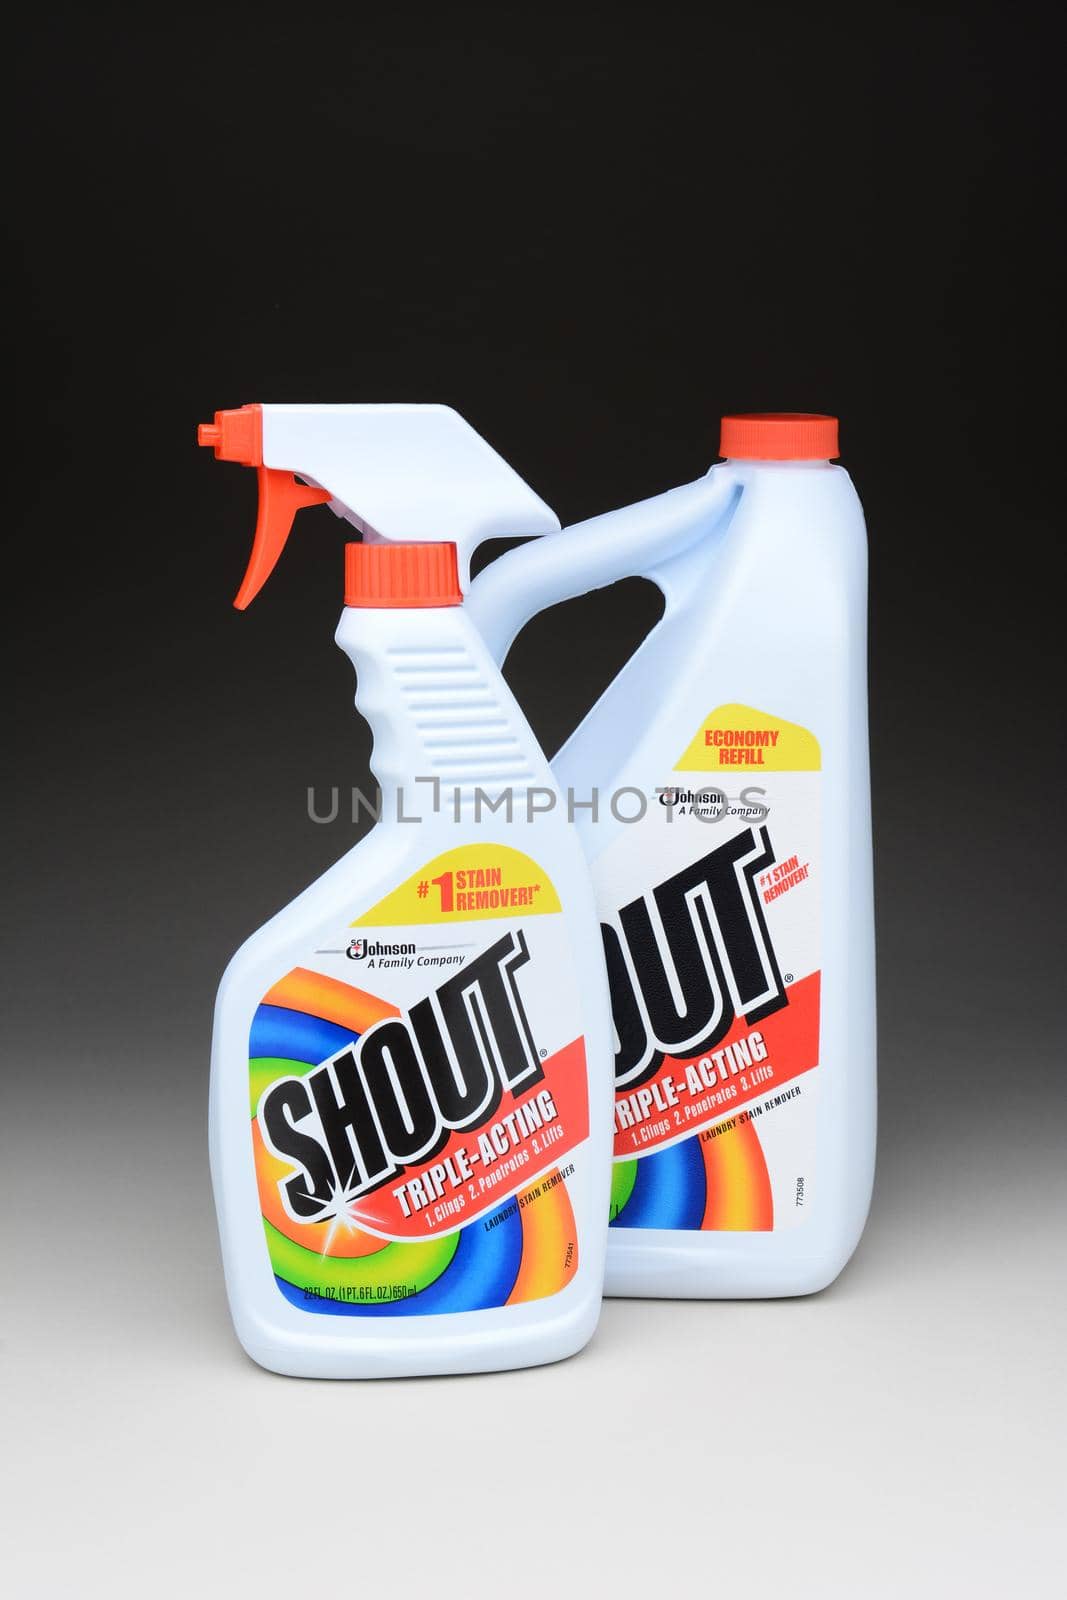 IRVINE, CA - January 11, 2013: A 22 oz bottle of Shout Laundry Stain Remover and a 60 oz refill bottle. Shout products are designed to help remove stains from clothing.